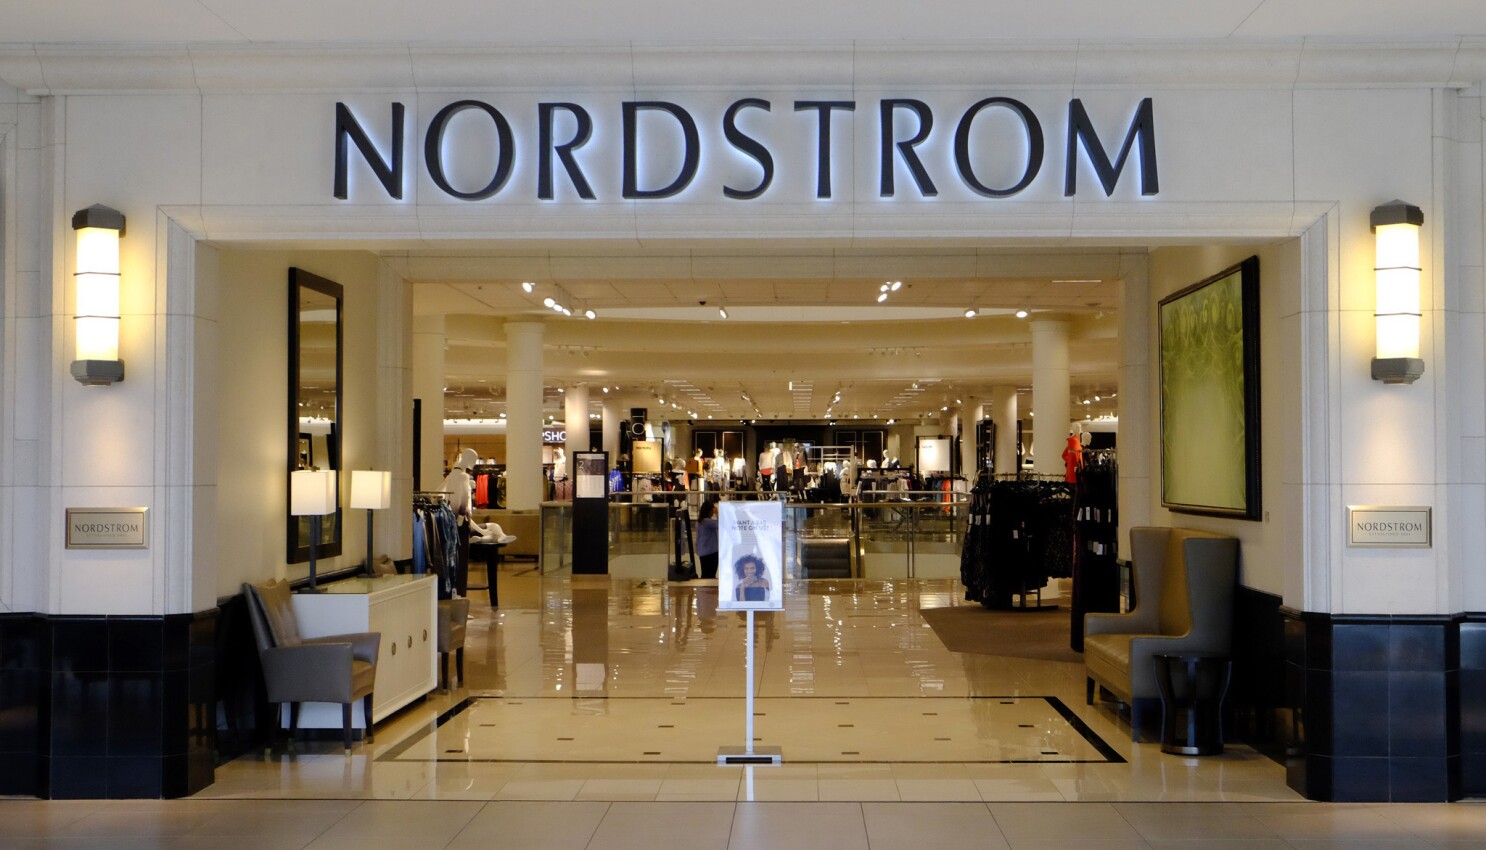 Nordstrom Return Policy Get a Refund Without Reciept